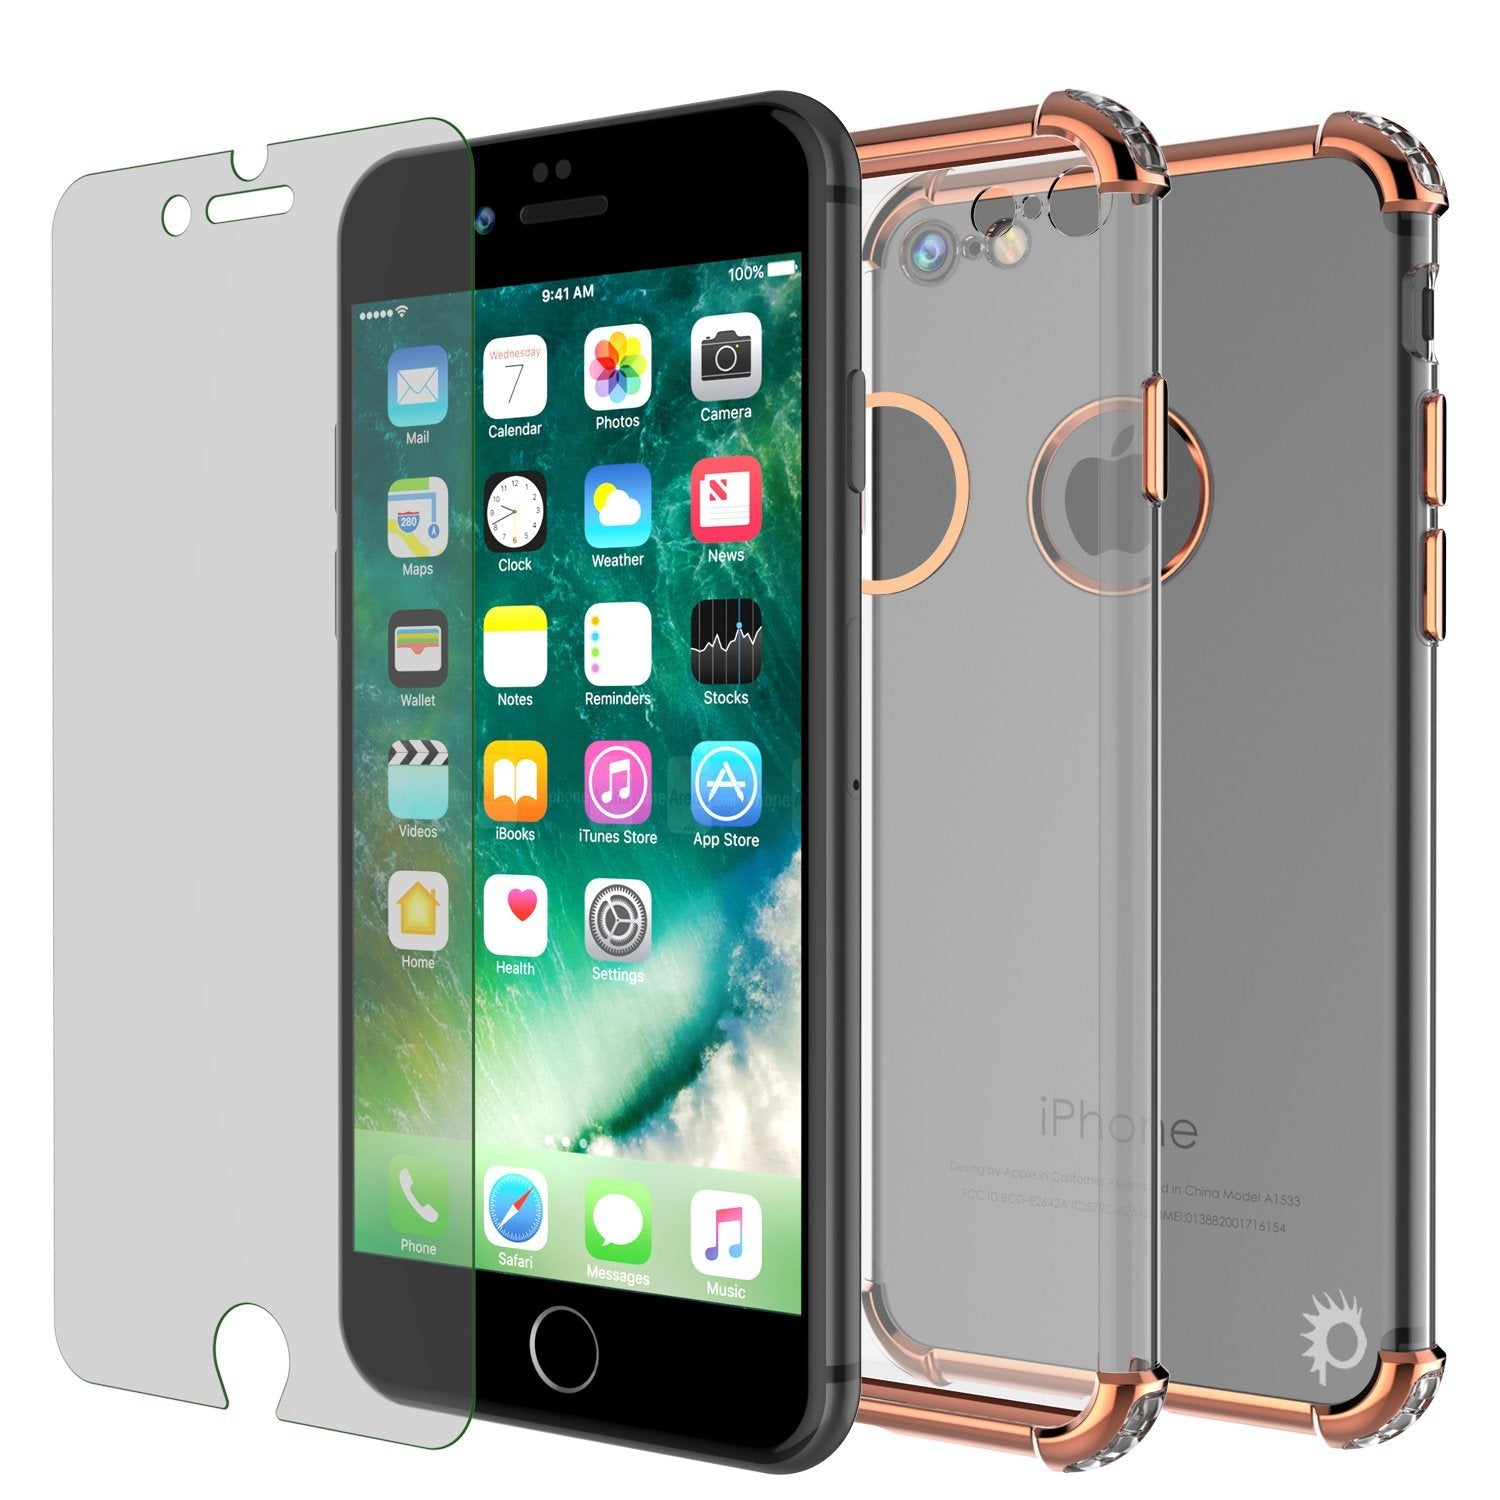 iPhone SE (4.7") Case, Punkcase [BLAZE SERIES] Protective Cover W/ PunkShield Screen Protector [Shockproof] [Slim Fit] for Apple iPhone [RoseGold]